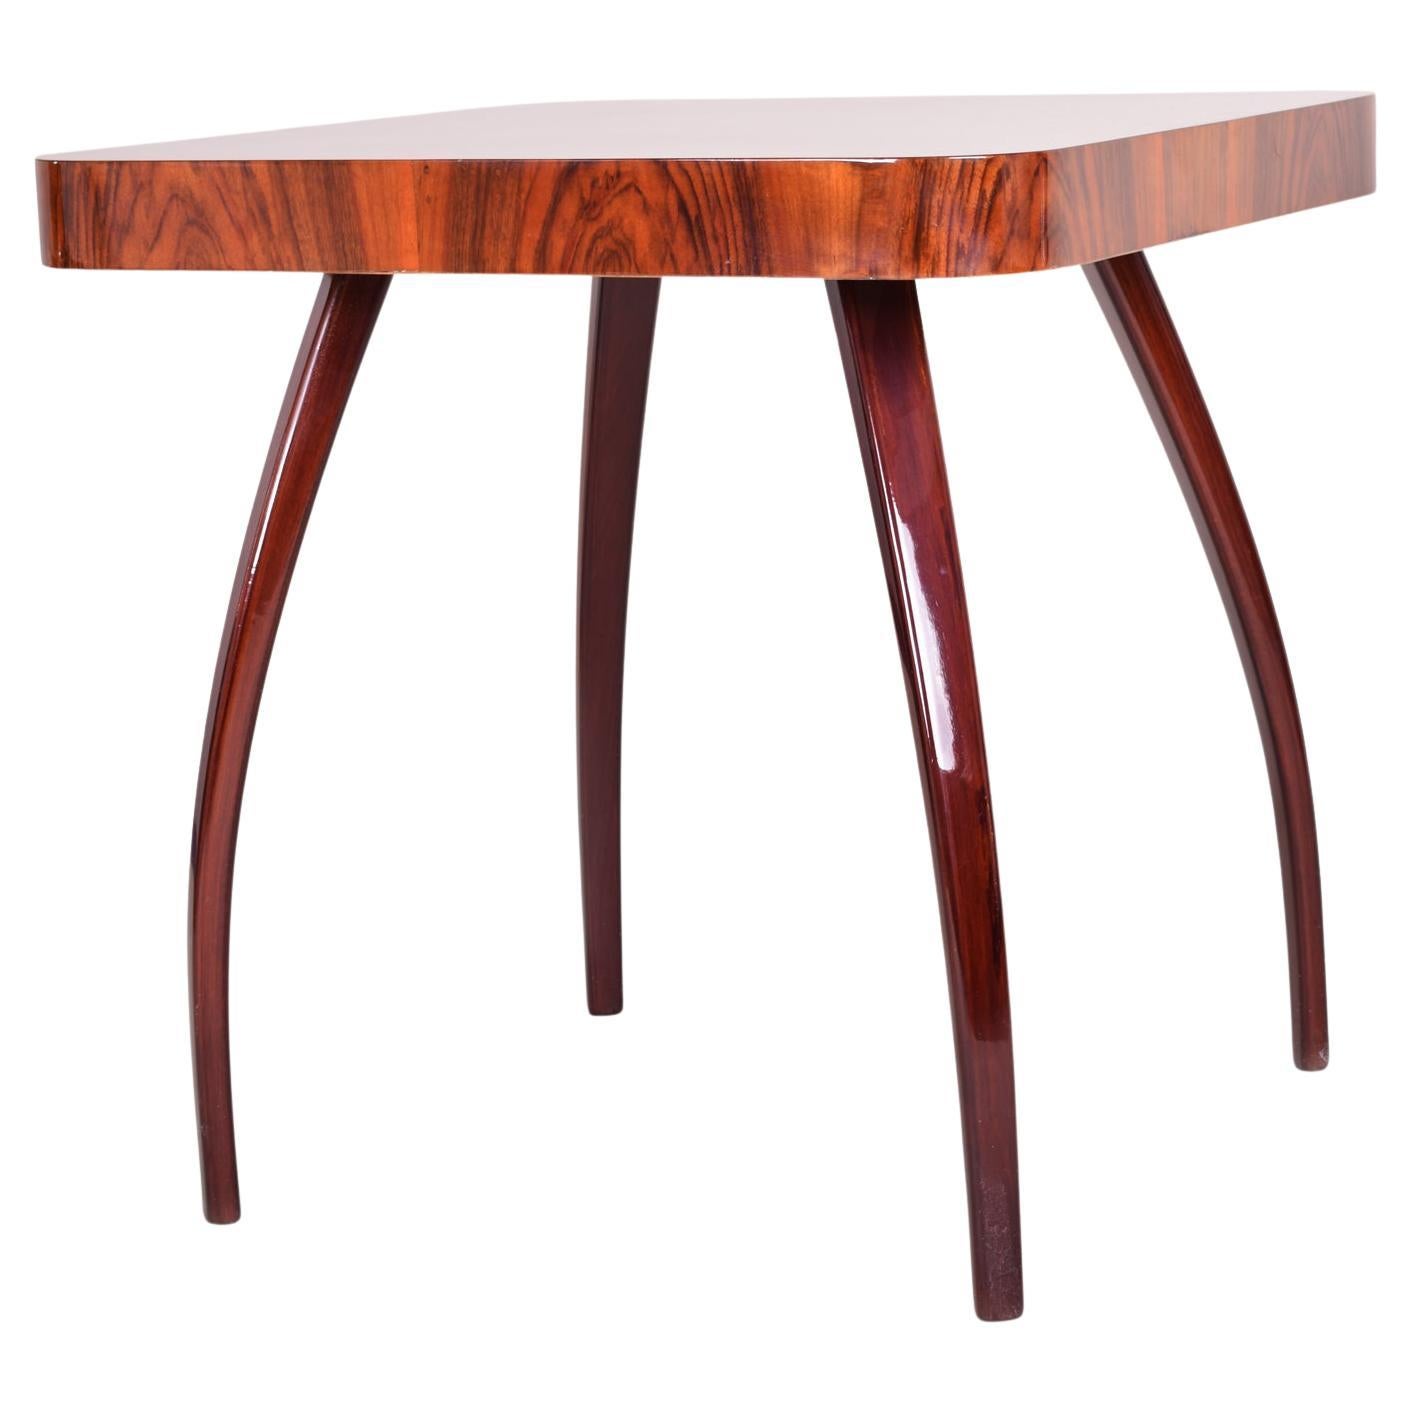 Small Brown Pavóuk Table, Designed by Halabala, 1940s, Made in Czechia For Sale